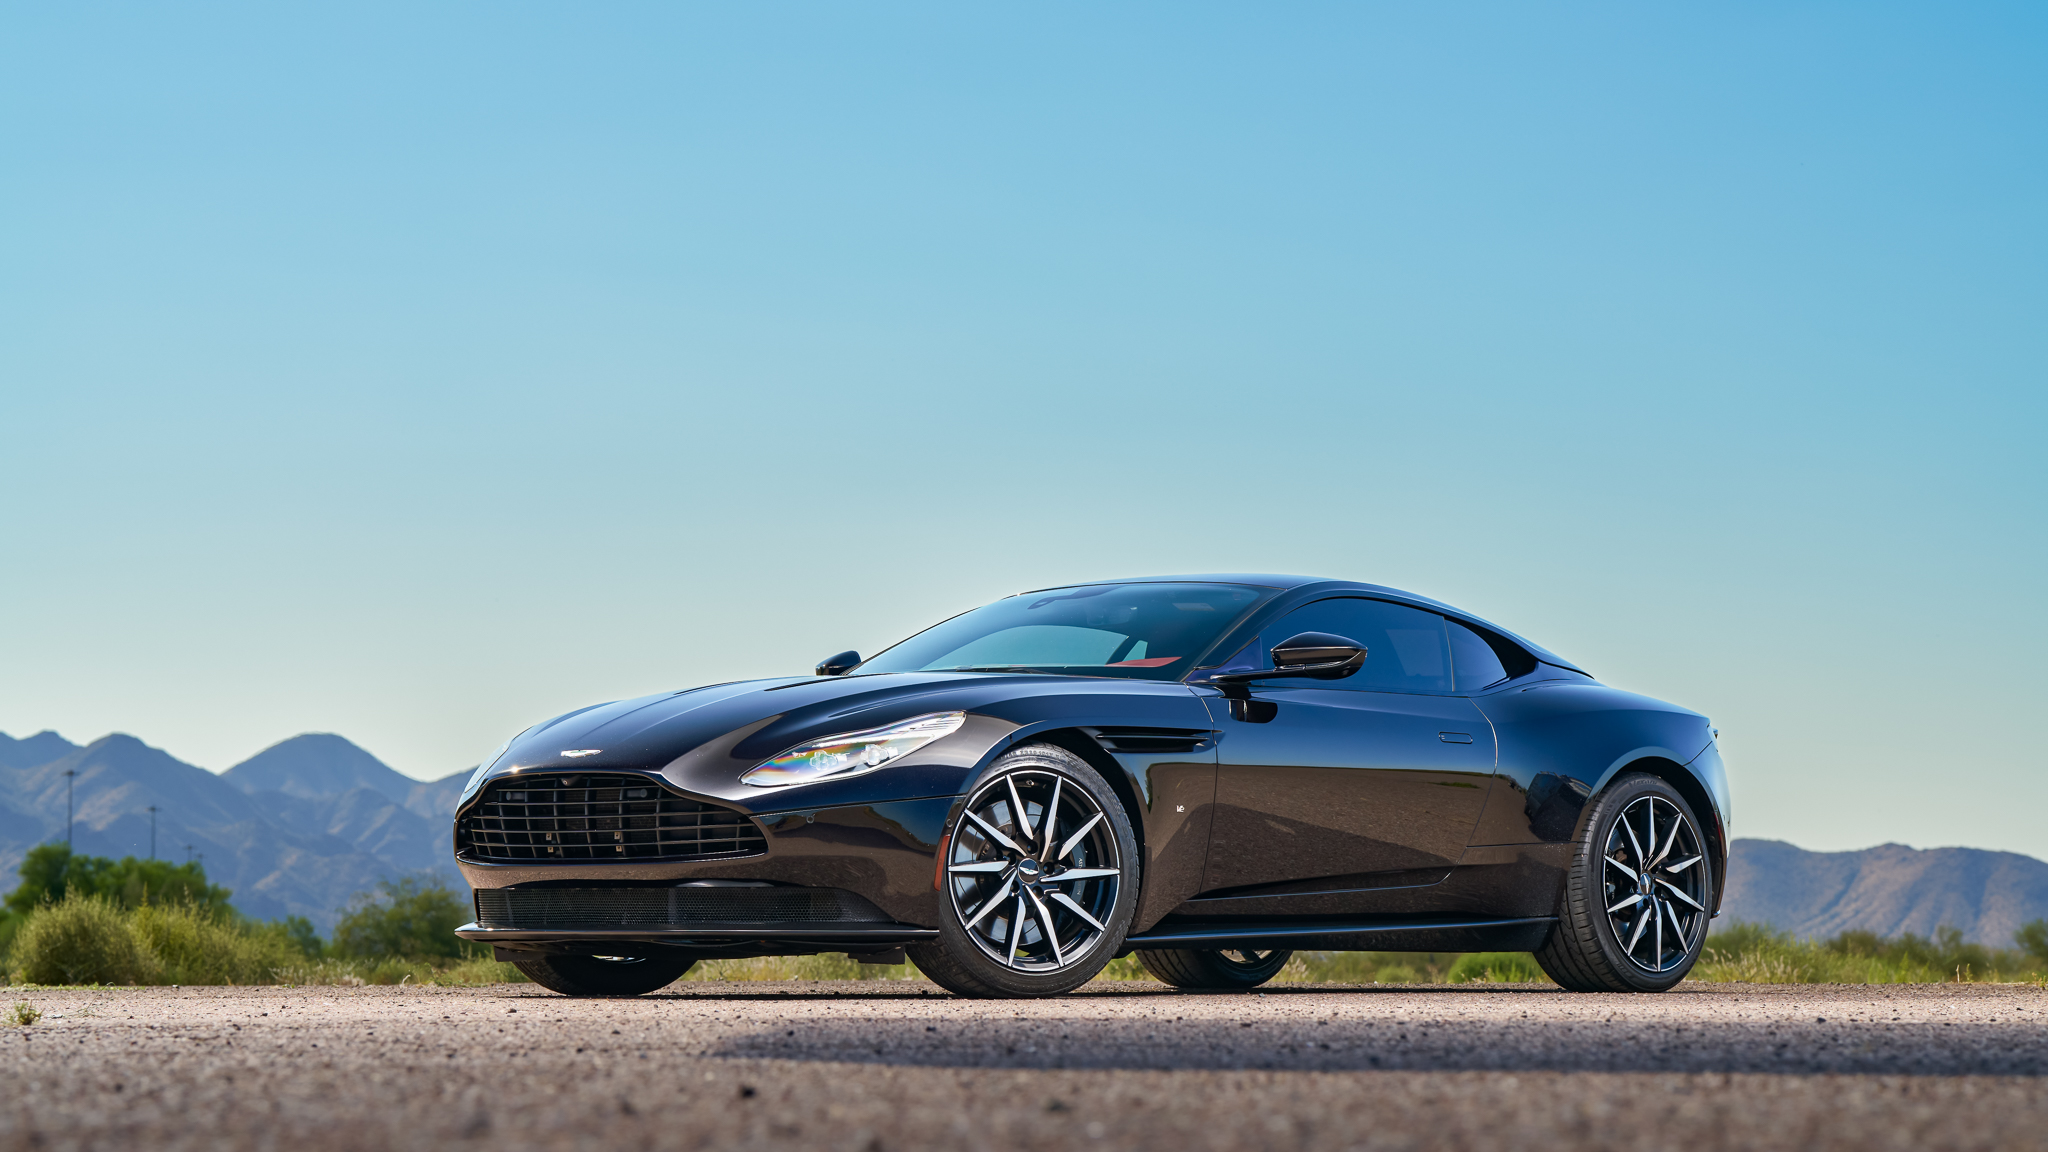 Used 2018 Aston Martin DB11 V12 Coupe Review